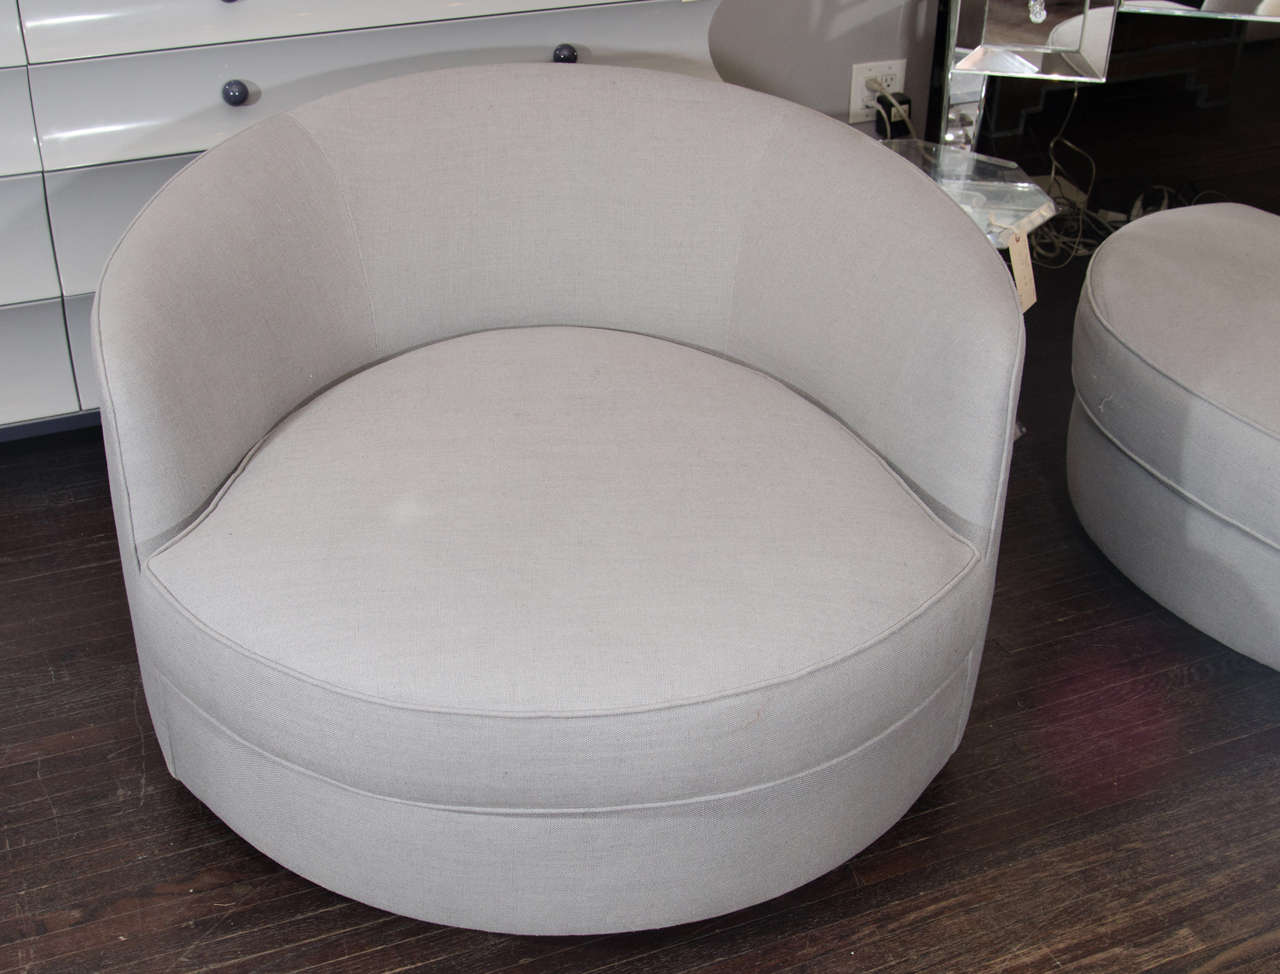 1960s Milo Baughman tub chair reupholstered in grey linen.